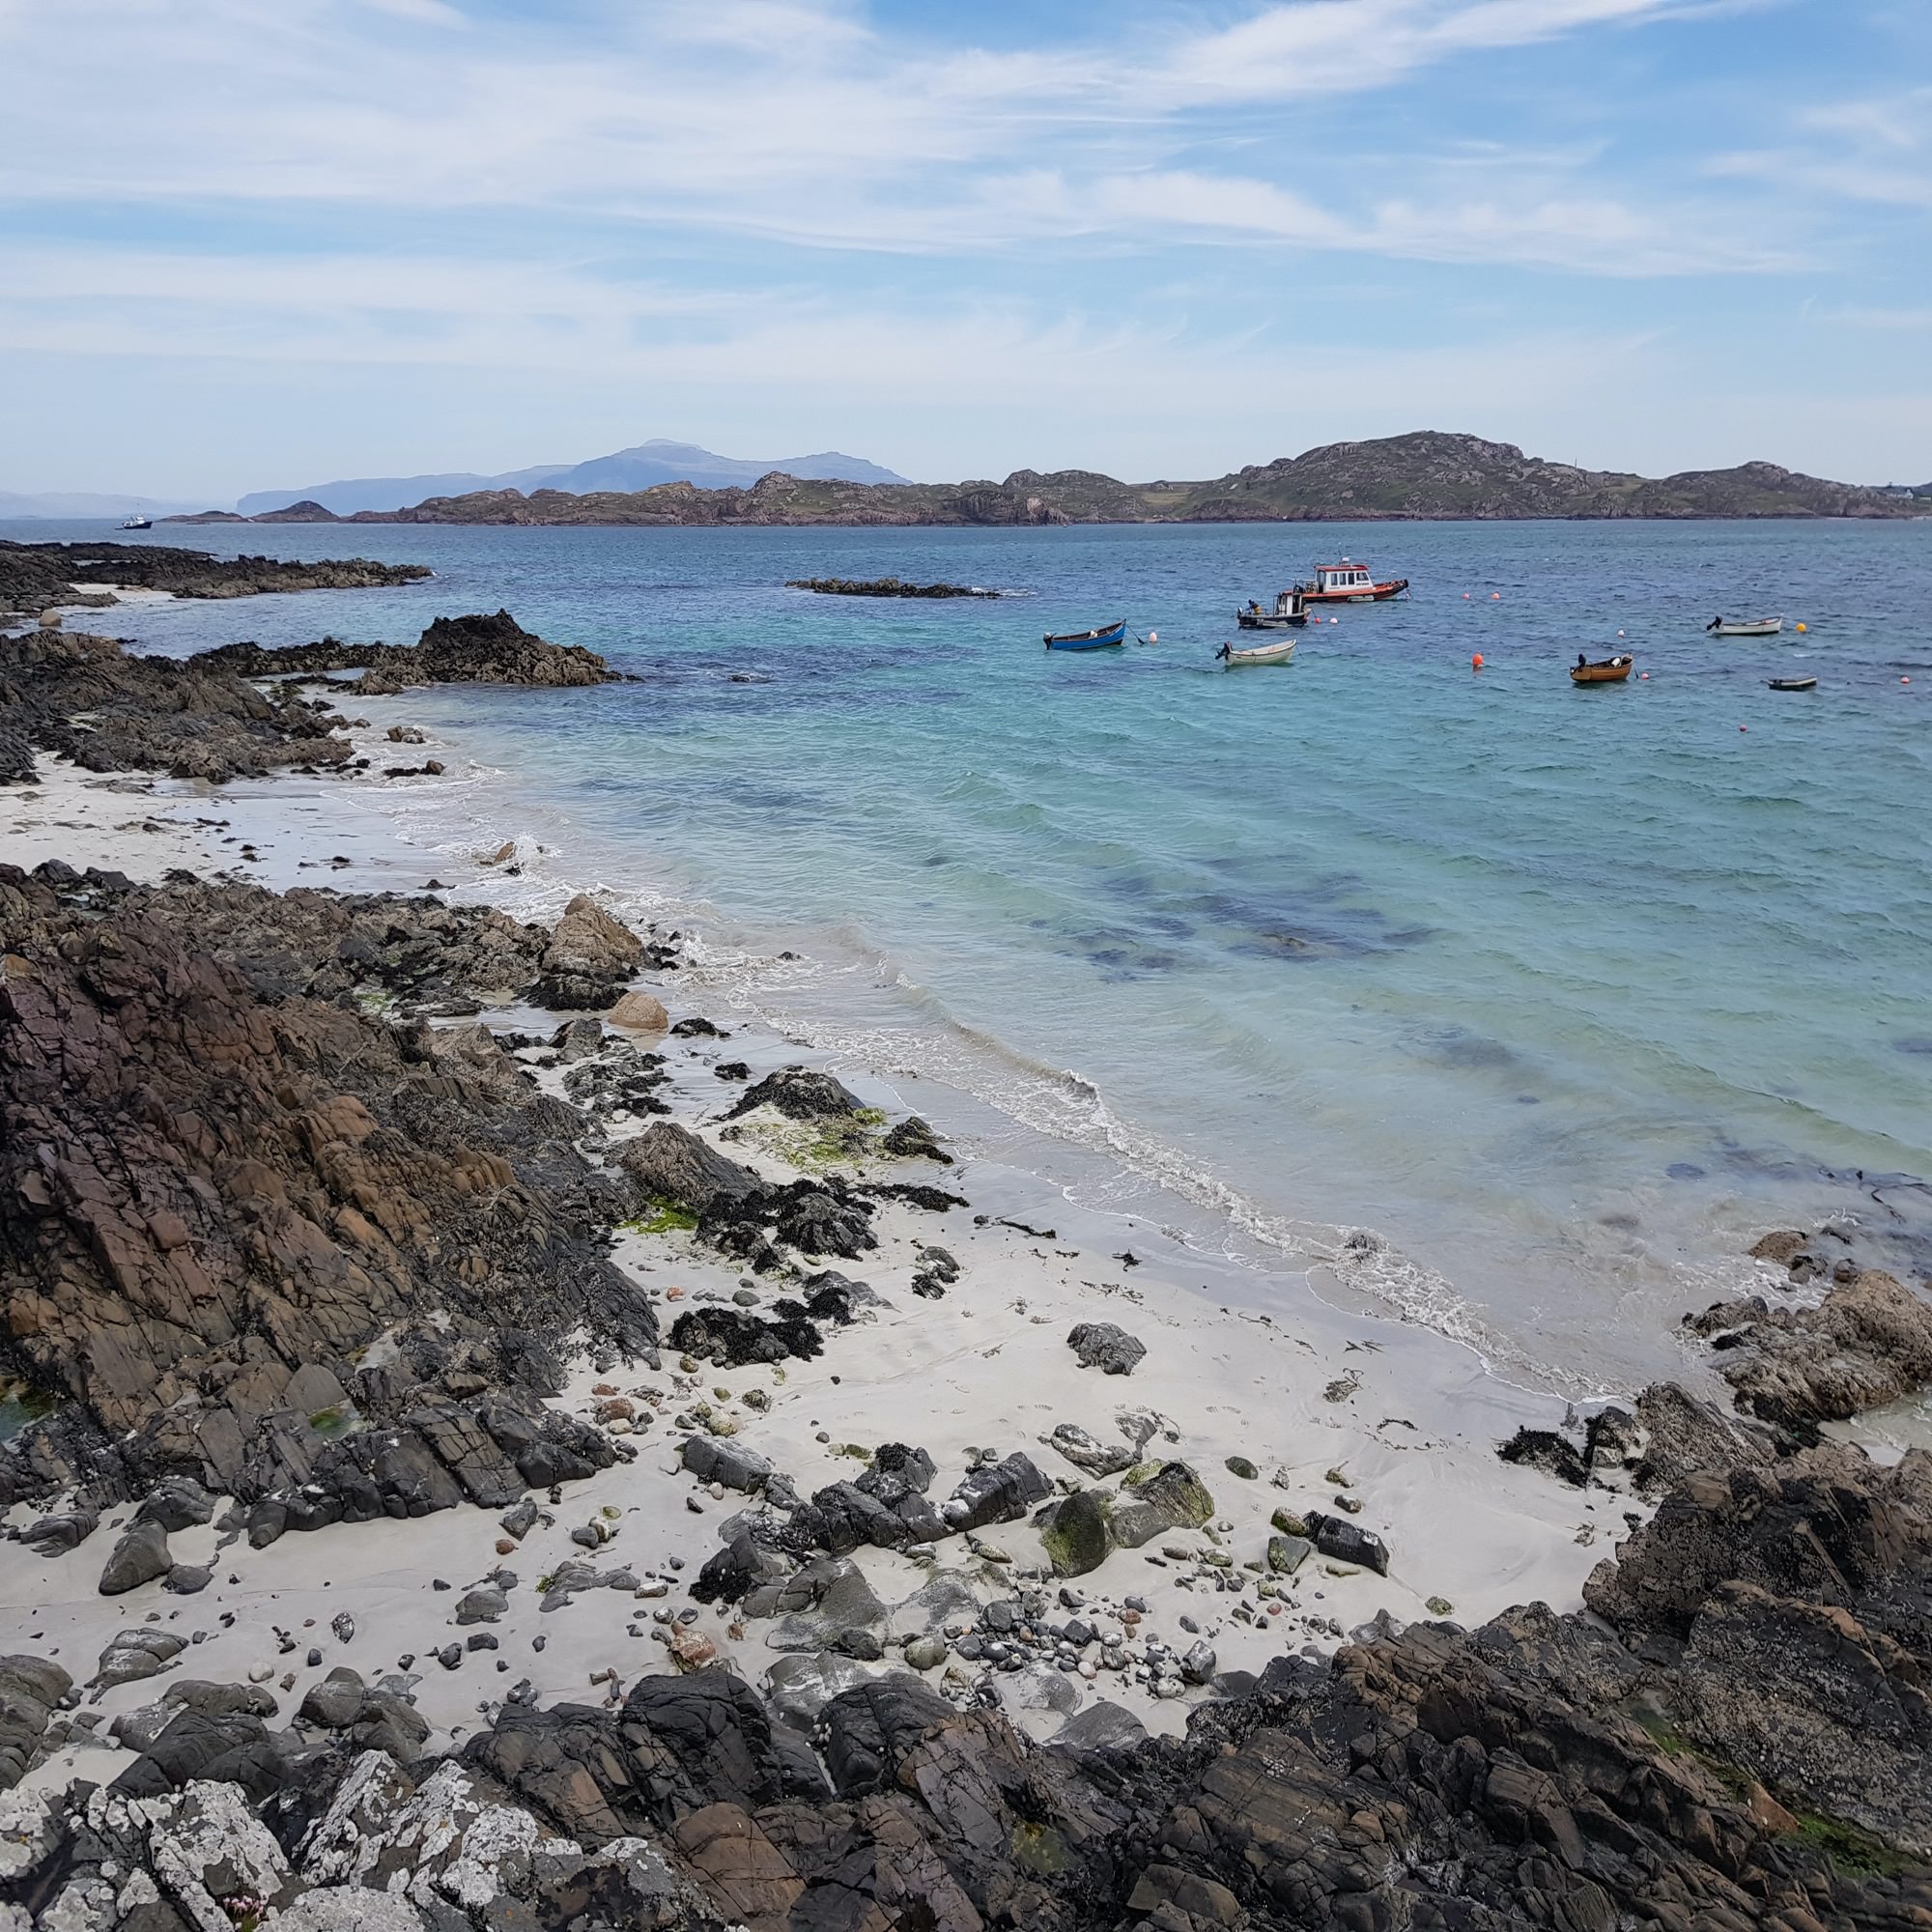 The sandy beaches of the Isle of Iona, just off the Ross of Mull